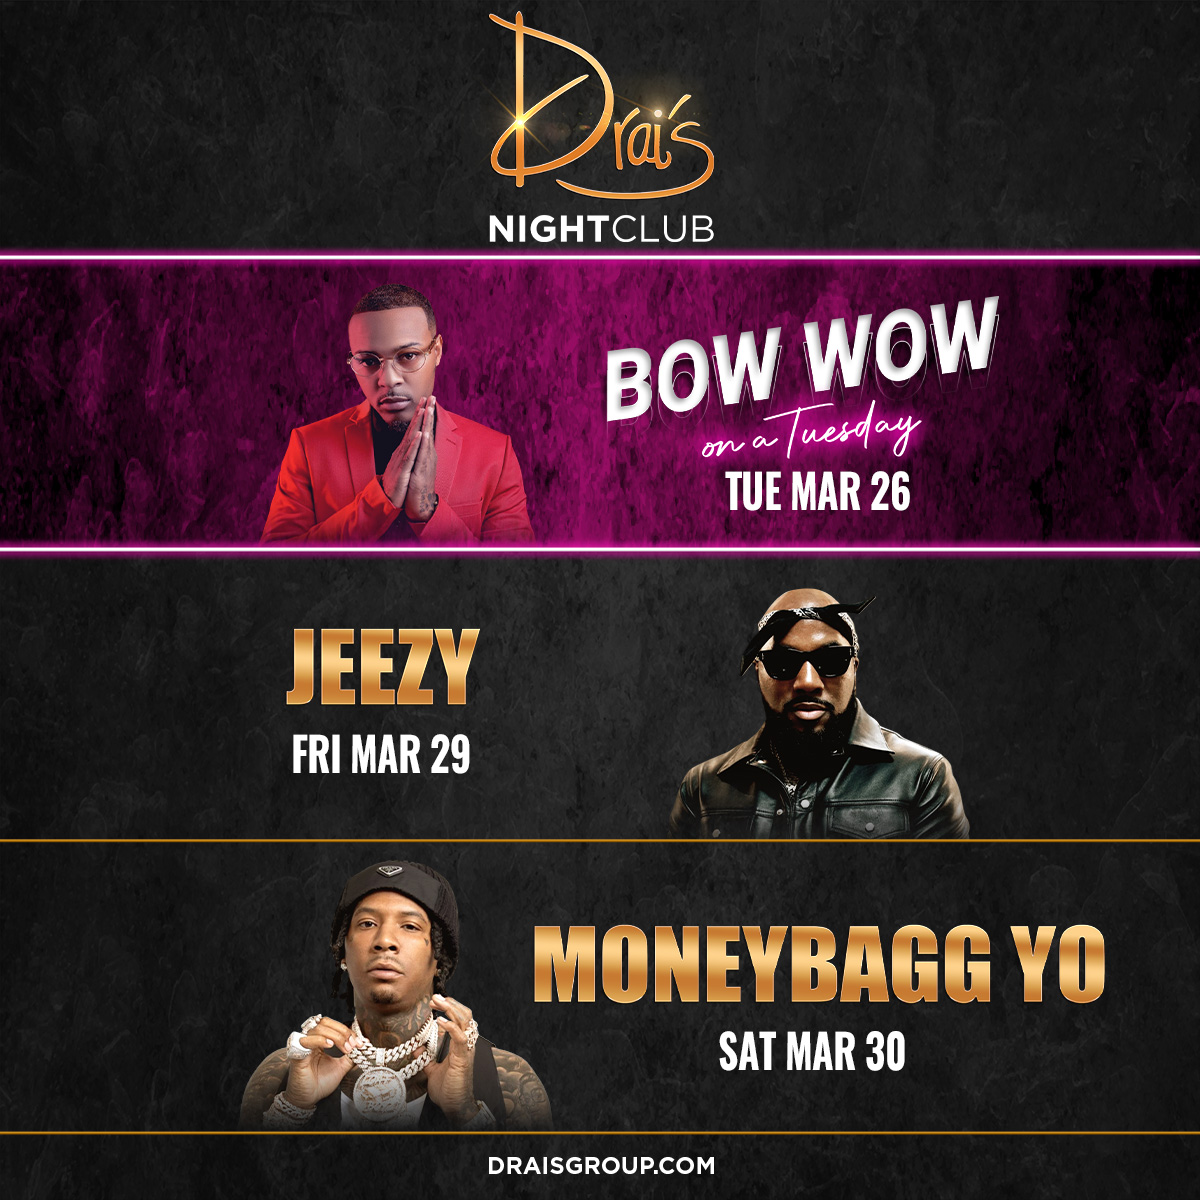 This week it's going down! Catch some of your favorites LIVE #OnlyatDrais 🎤🔥 Tue - Bow Wow Fri - Jeezy Sat - Moneybagg Yo Get your tickets now at ow.ly/BOis50QYf13 ✨